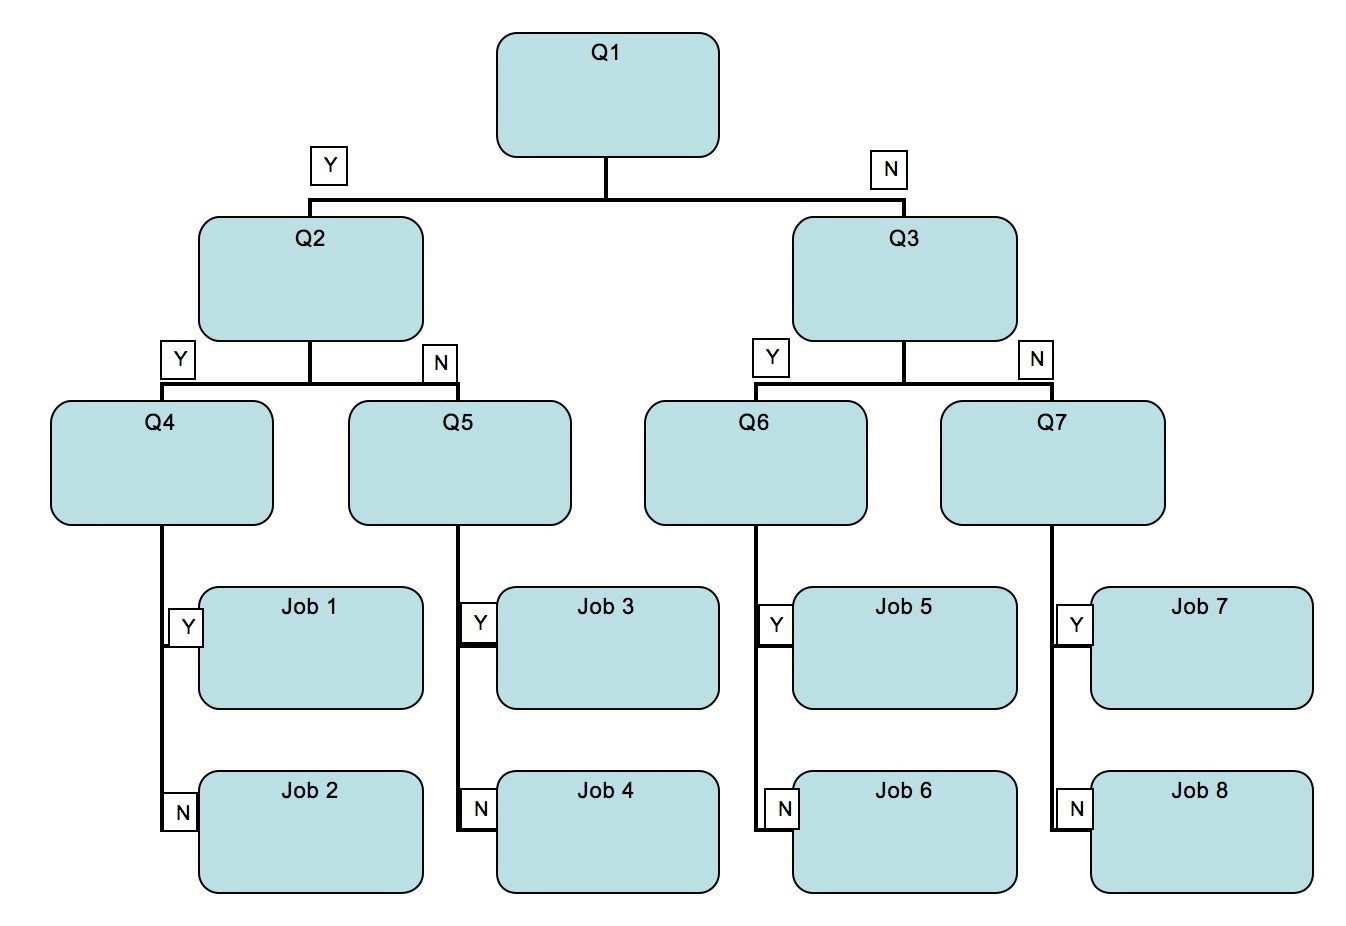 Using Decision Trees to categorise pare and contrast